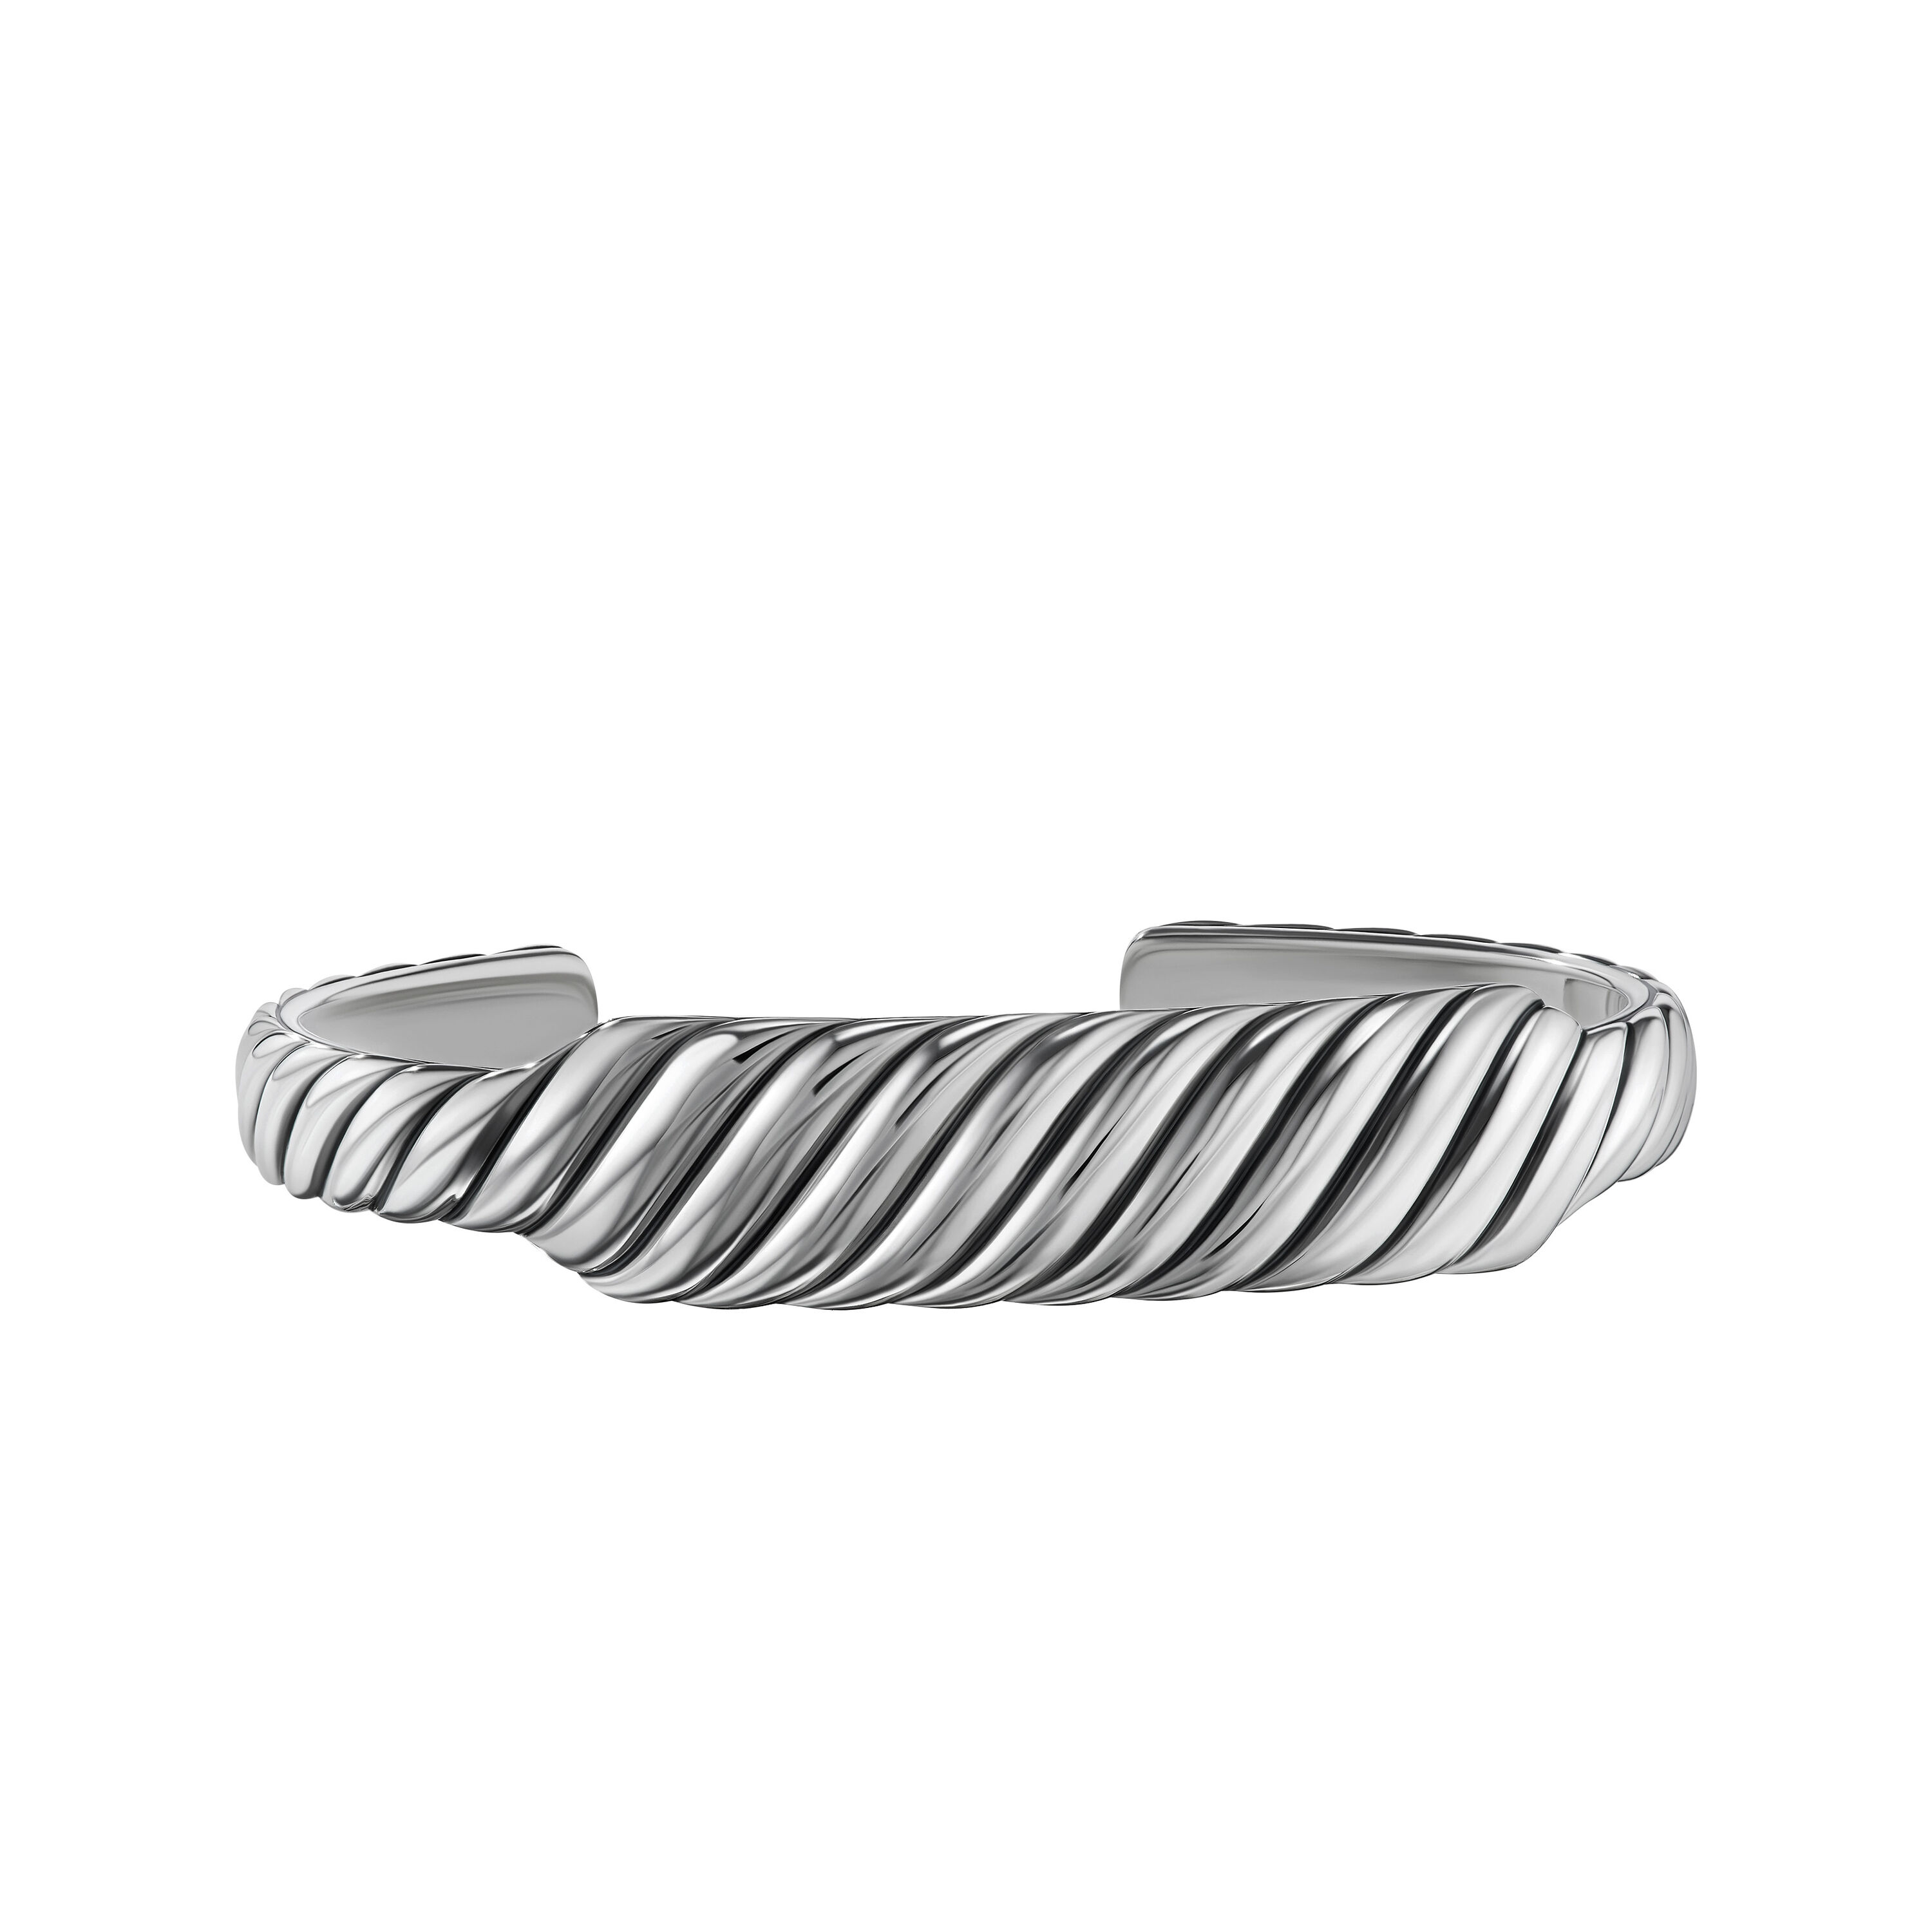 Sculpted Cable Contour Cuff Bracelet in Sterling Silver, 13mm